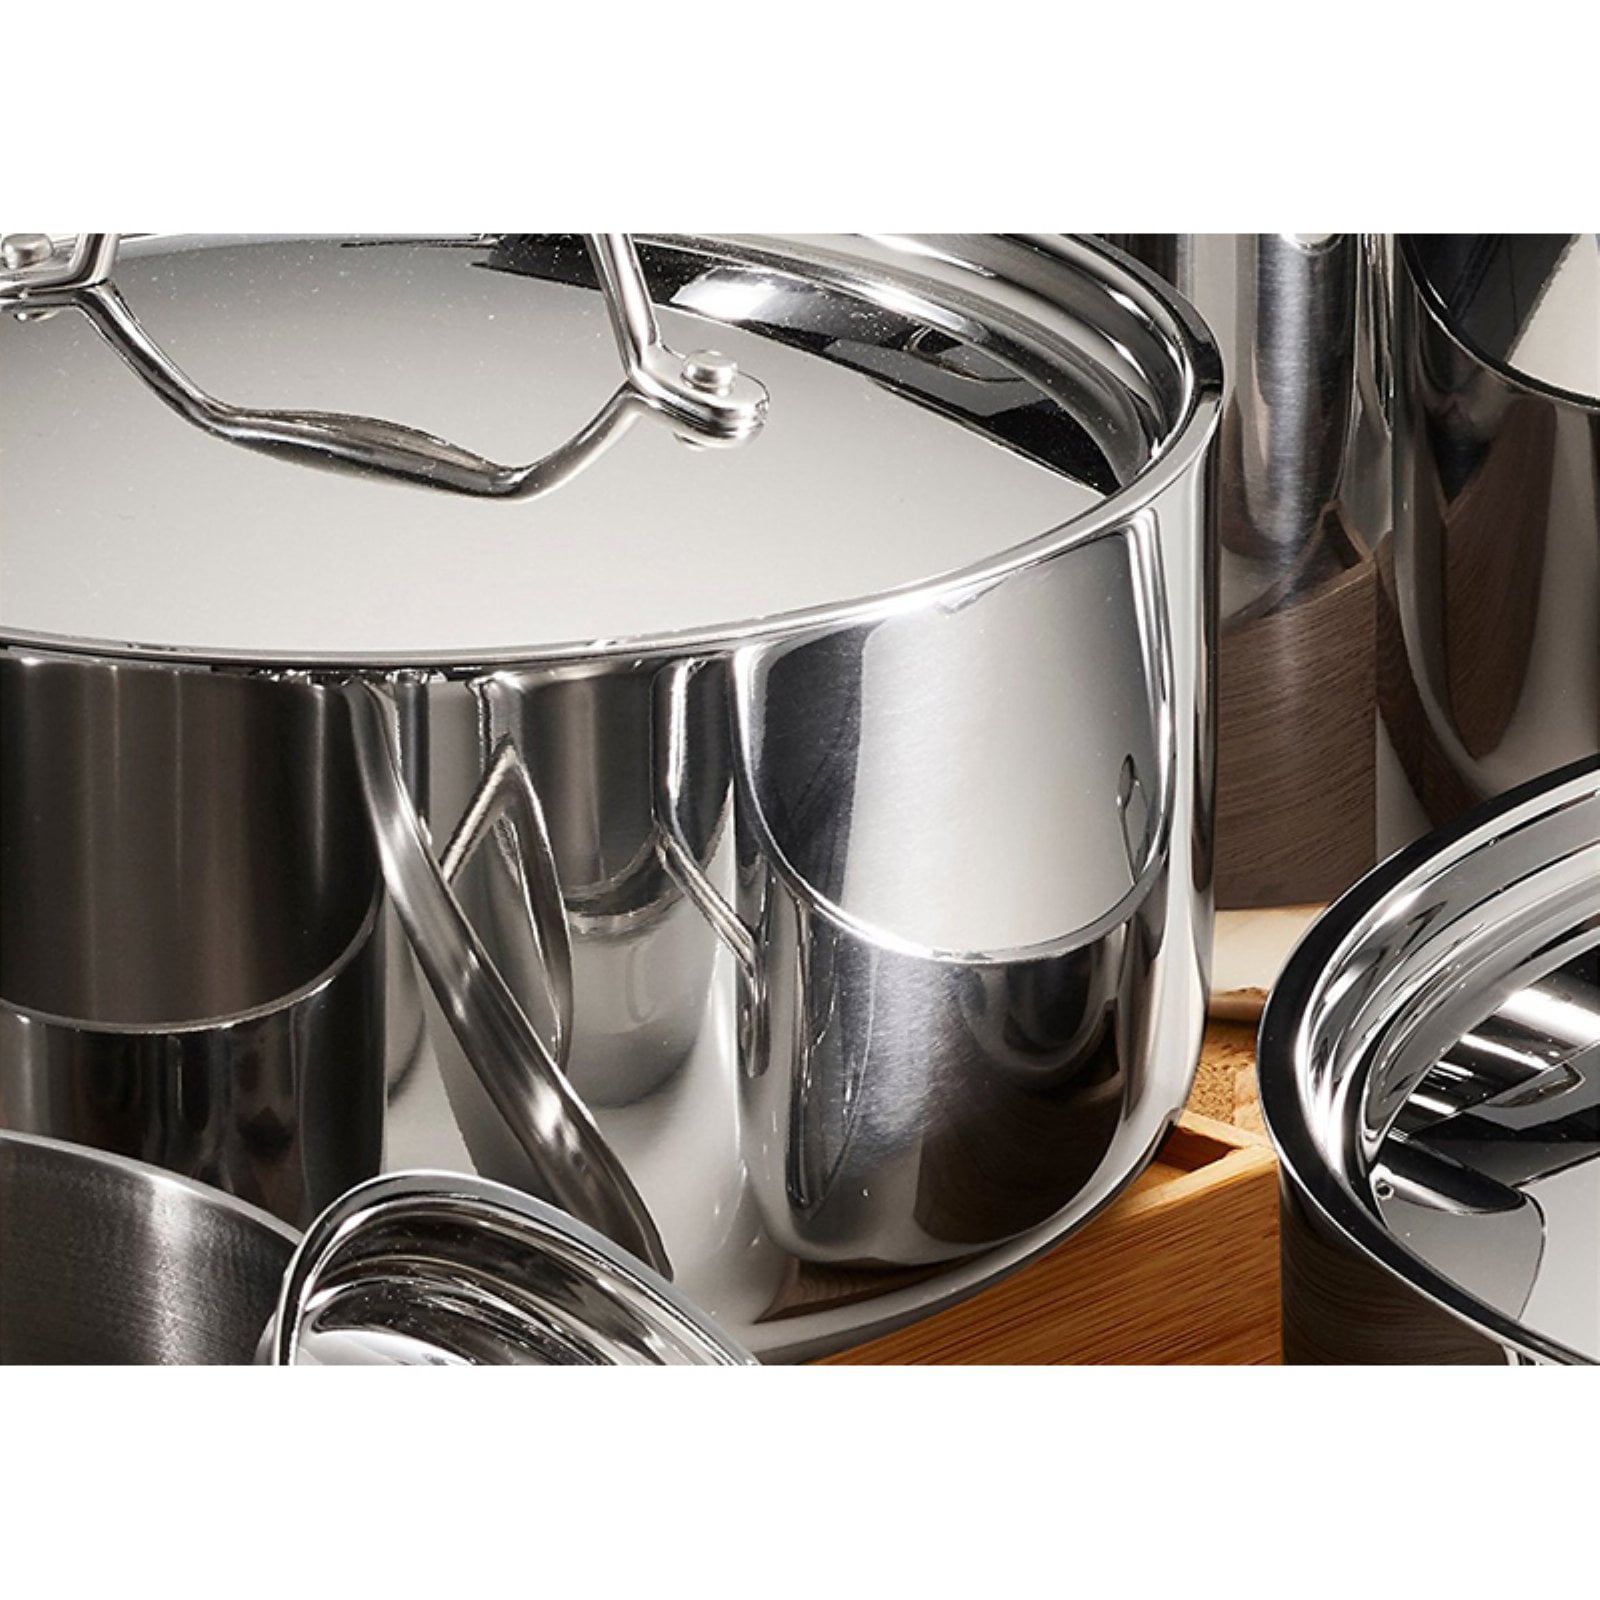 Tramontina Tri-Ply Clad Gourmet 12 Pc Cookware Set & Reviews